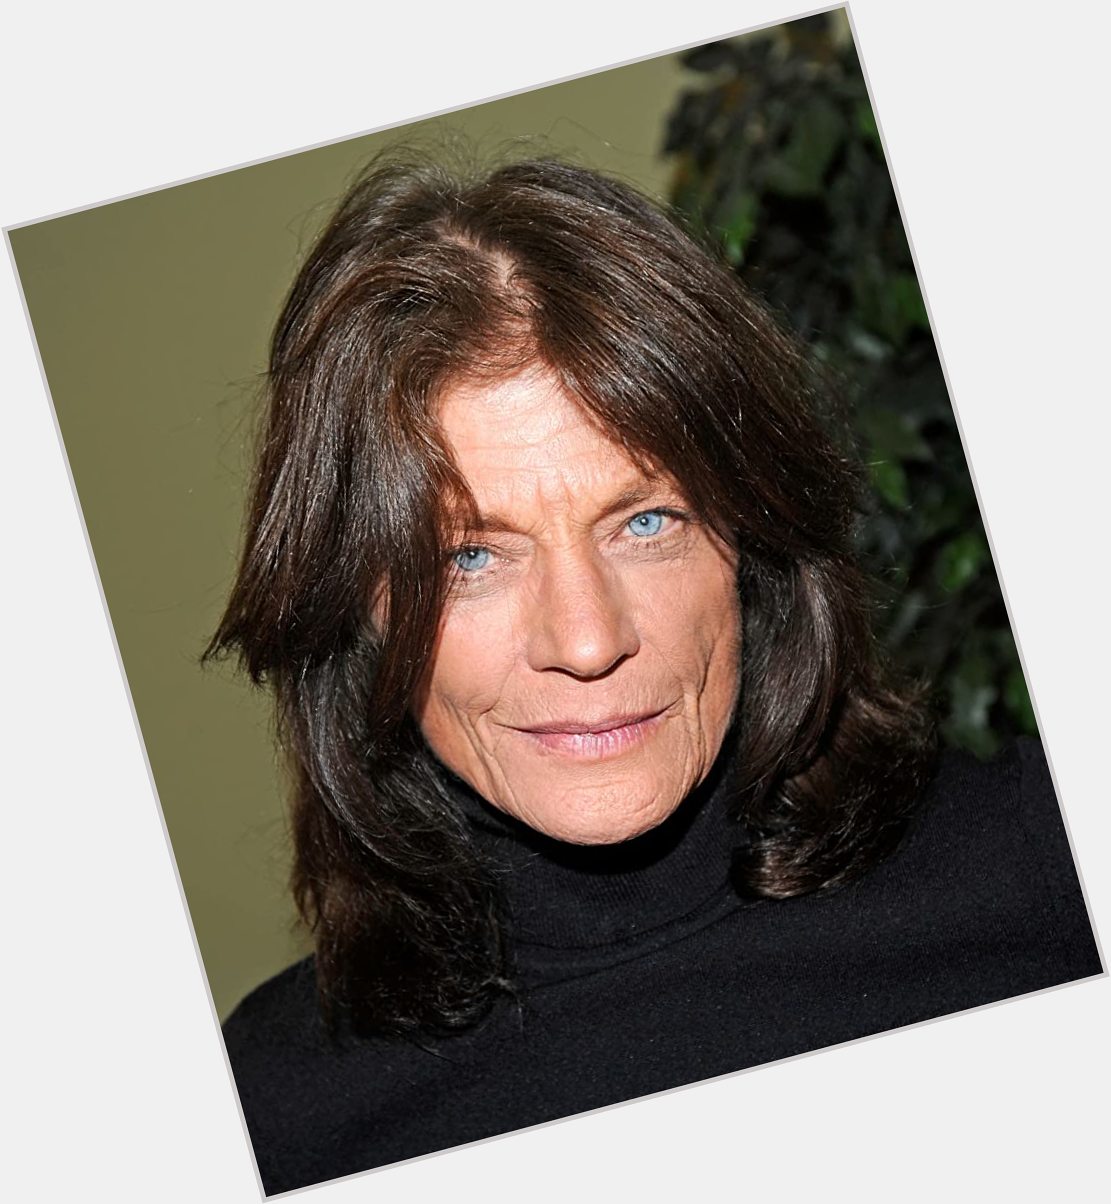 Happy birthday, Meg Foster!

What is your favorite role she has done? 